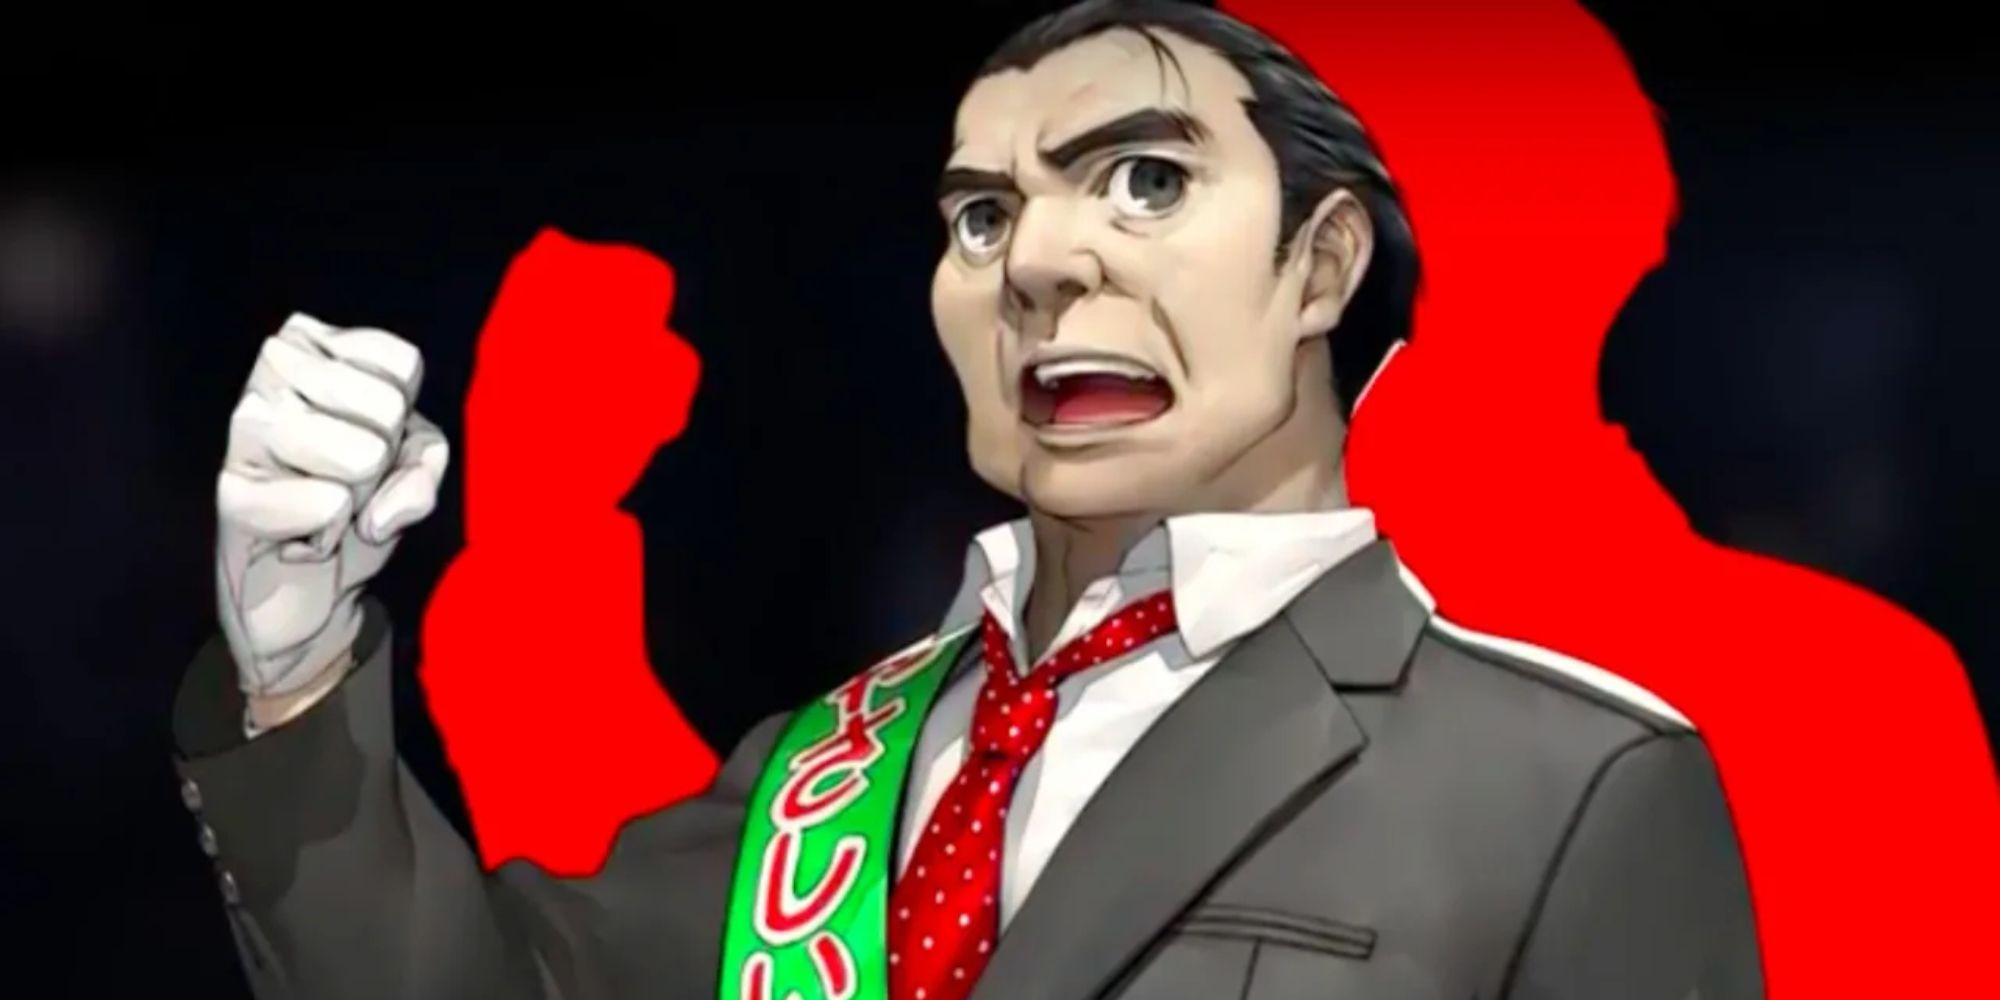 a character portrait of Toranosuke Yoshida from Persona 5 Royal standing with a green sash over his torso and his fist raised triumphantly